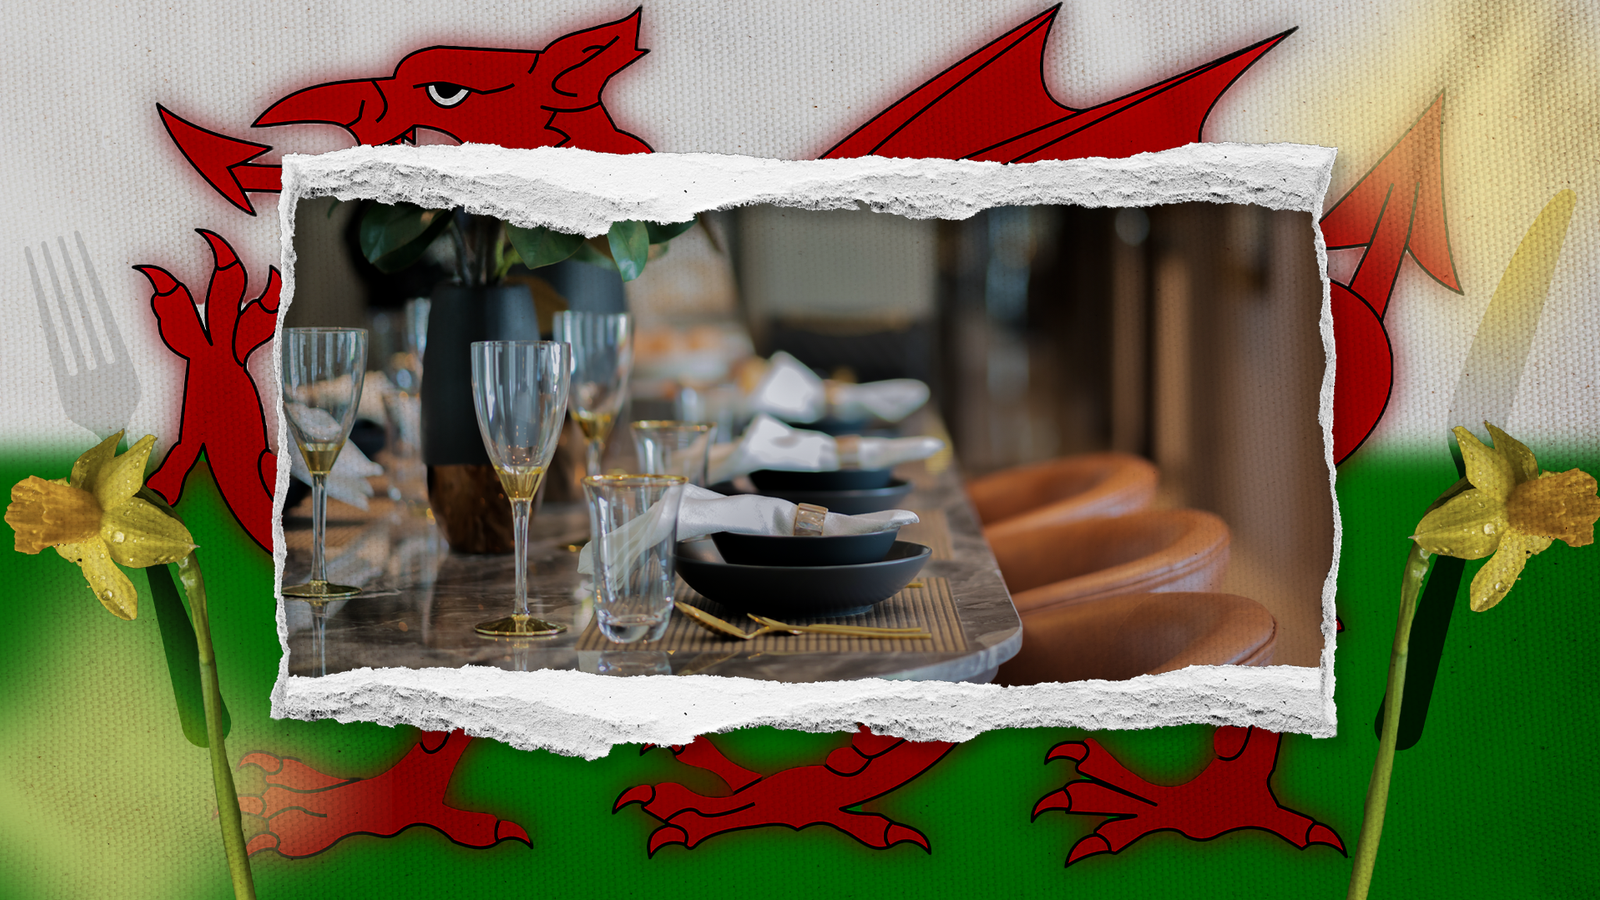 Ryan Reynolds may have sprinkled Hollywood dust on Wrexham, but Wales's hospitality sector is struggling